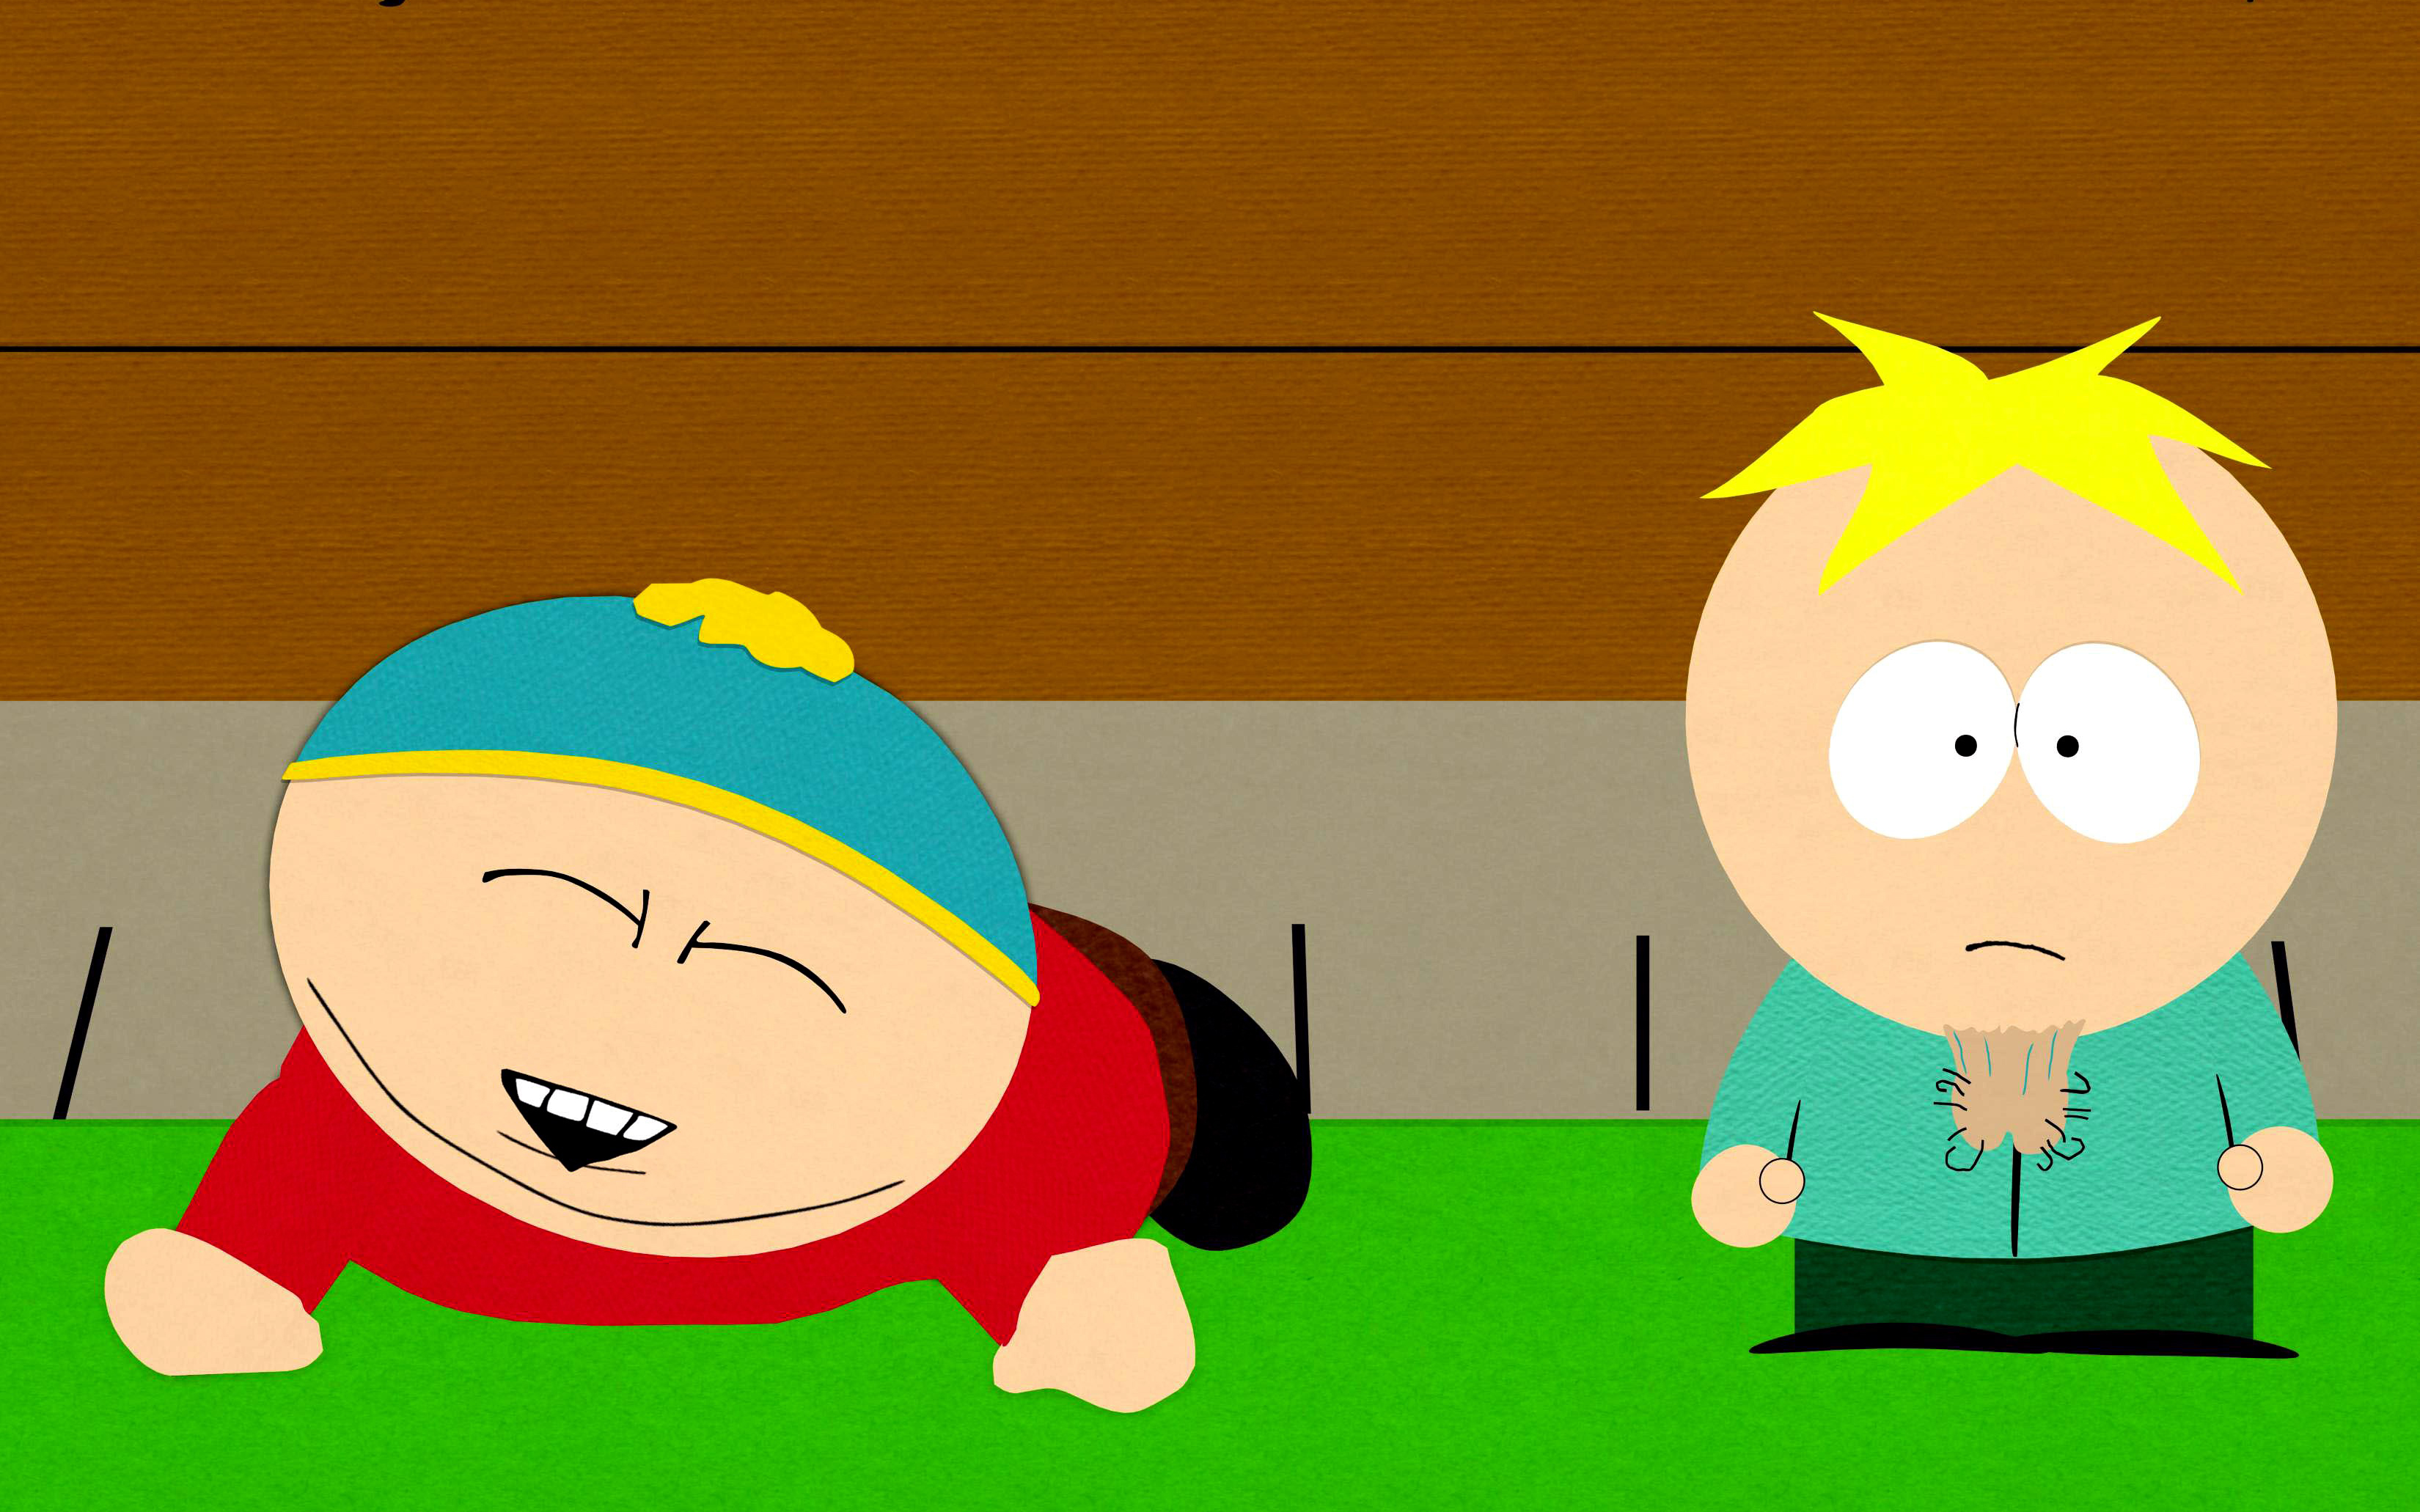 android tv show, south park, butters stotch, eric cartman